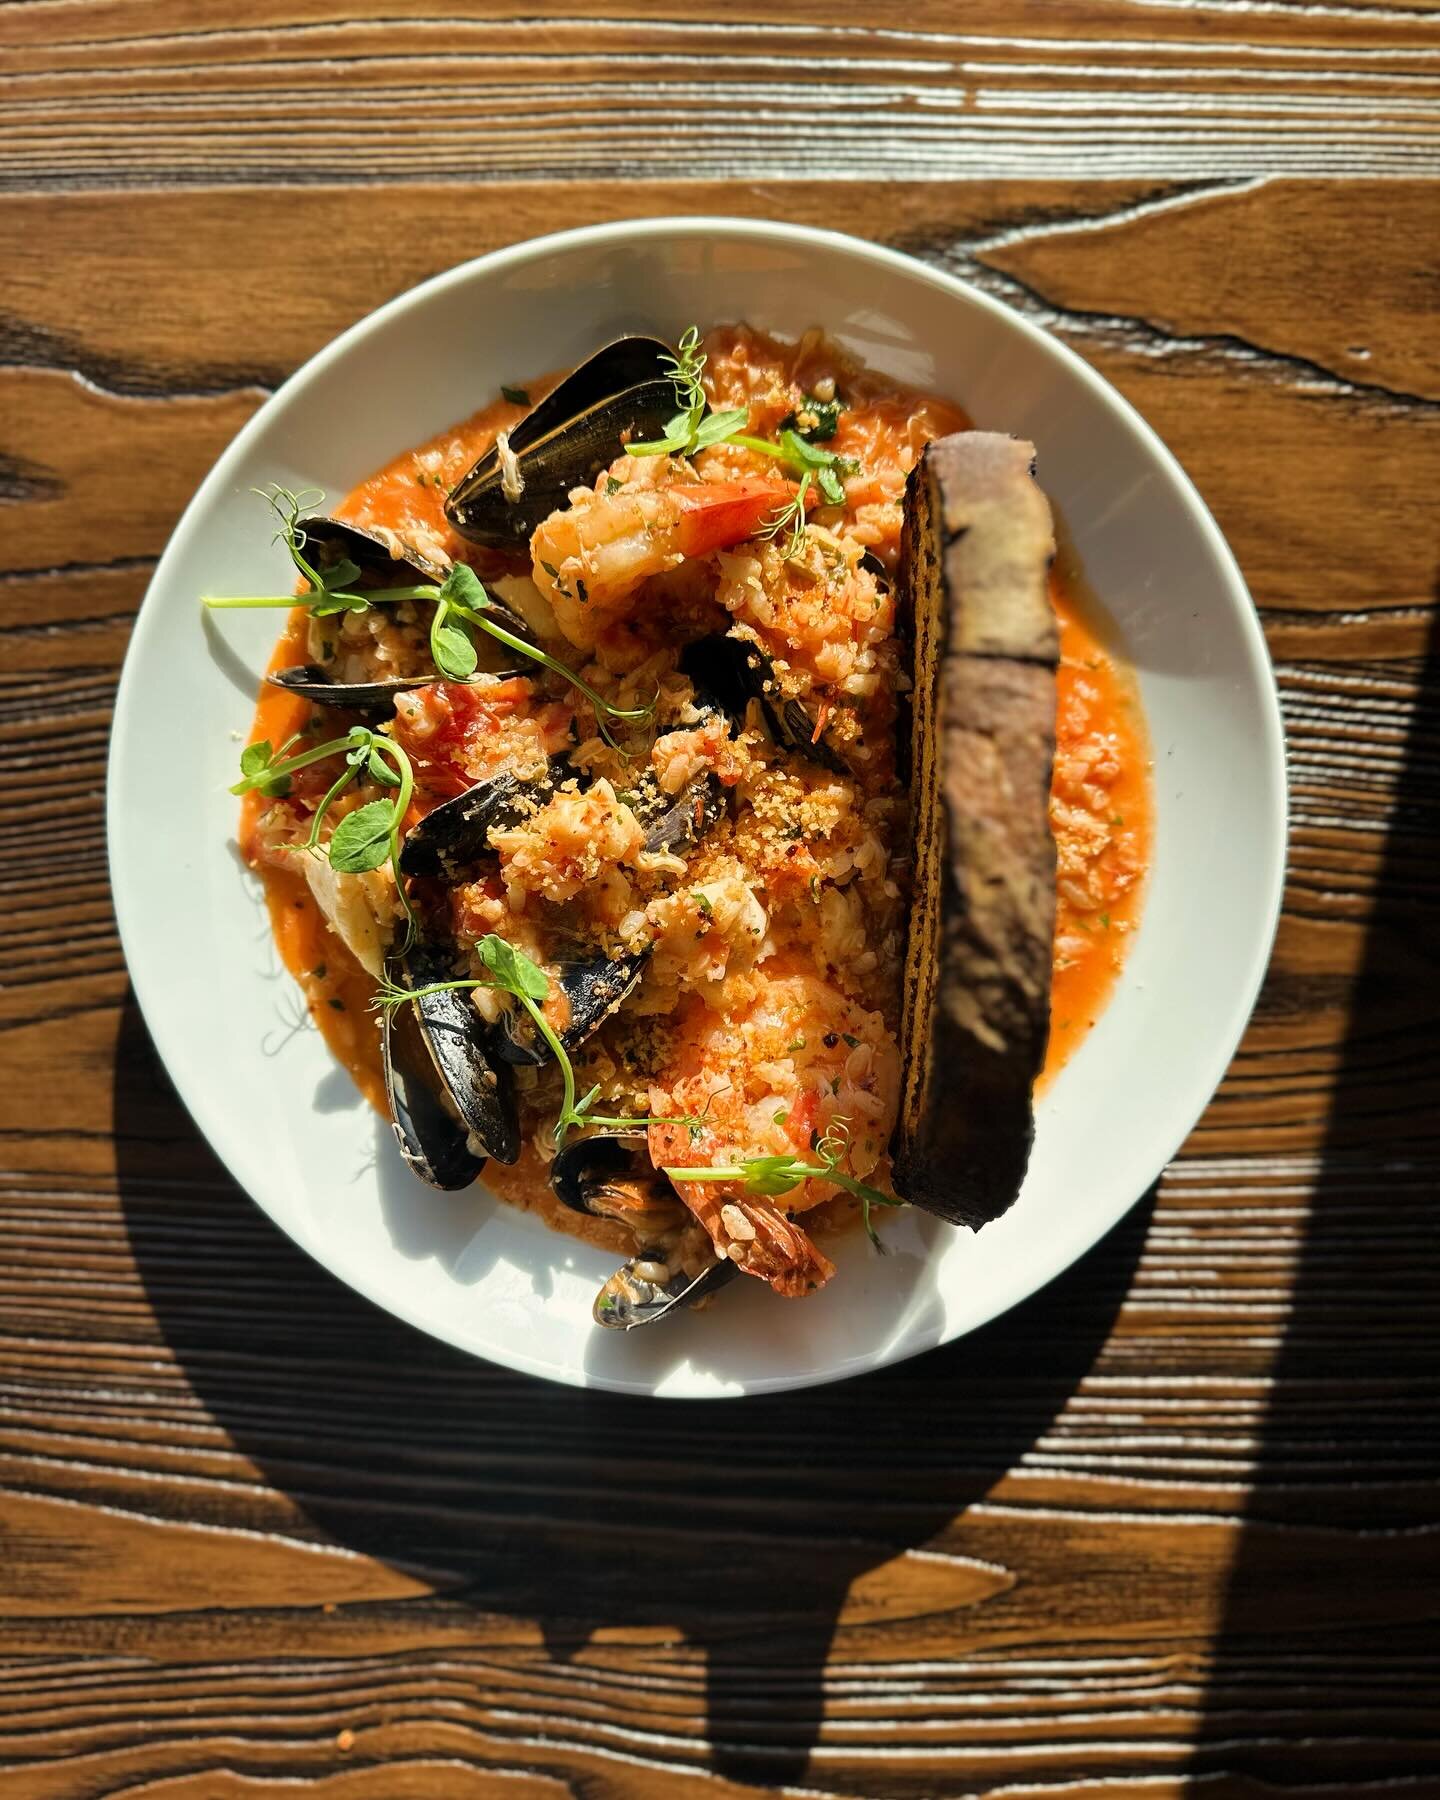 Black Sheep&rsquo;s version of Cioppino, a seafood stew where Italian fisherman would share the day&rsquo;s bounty. We use local fish stewed with Bianco tomatoes, basil &amp; mirabelli rice, a New Jersey grain similar to risotto. Finished with a piec